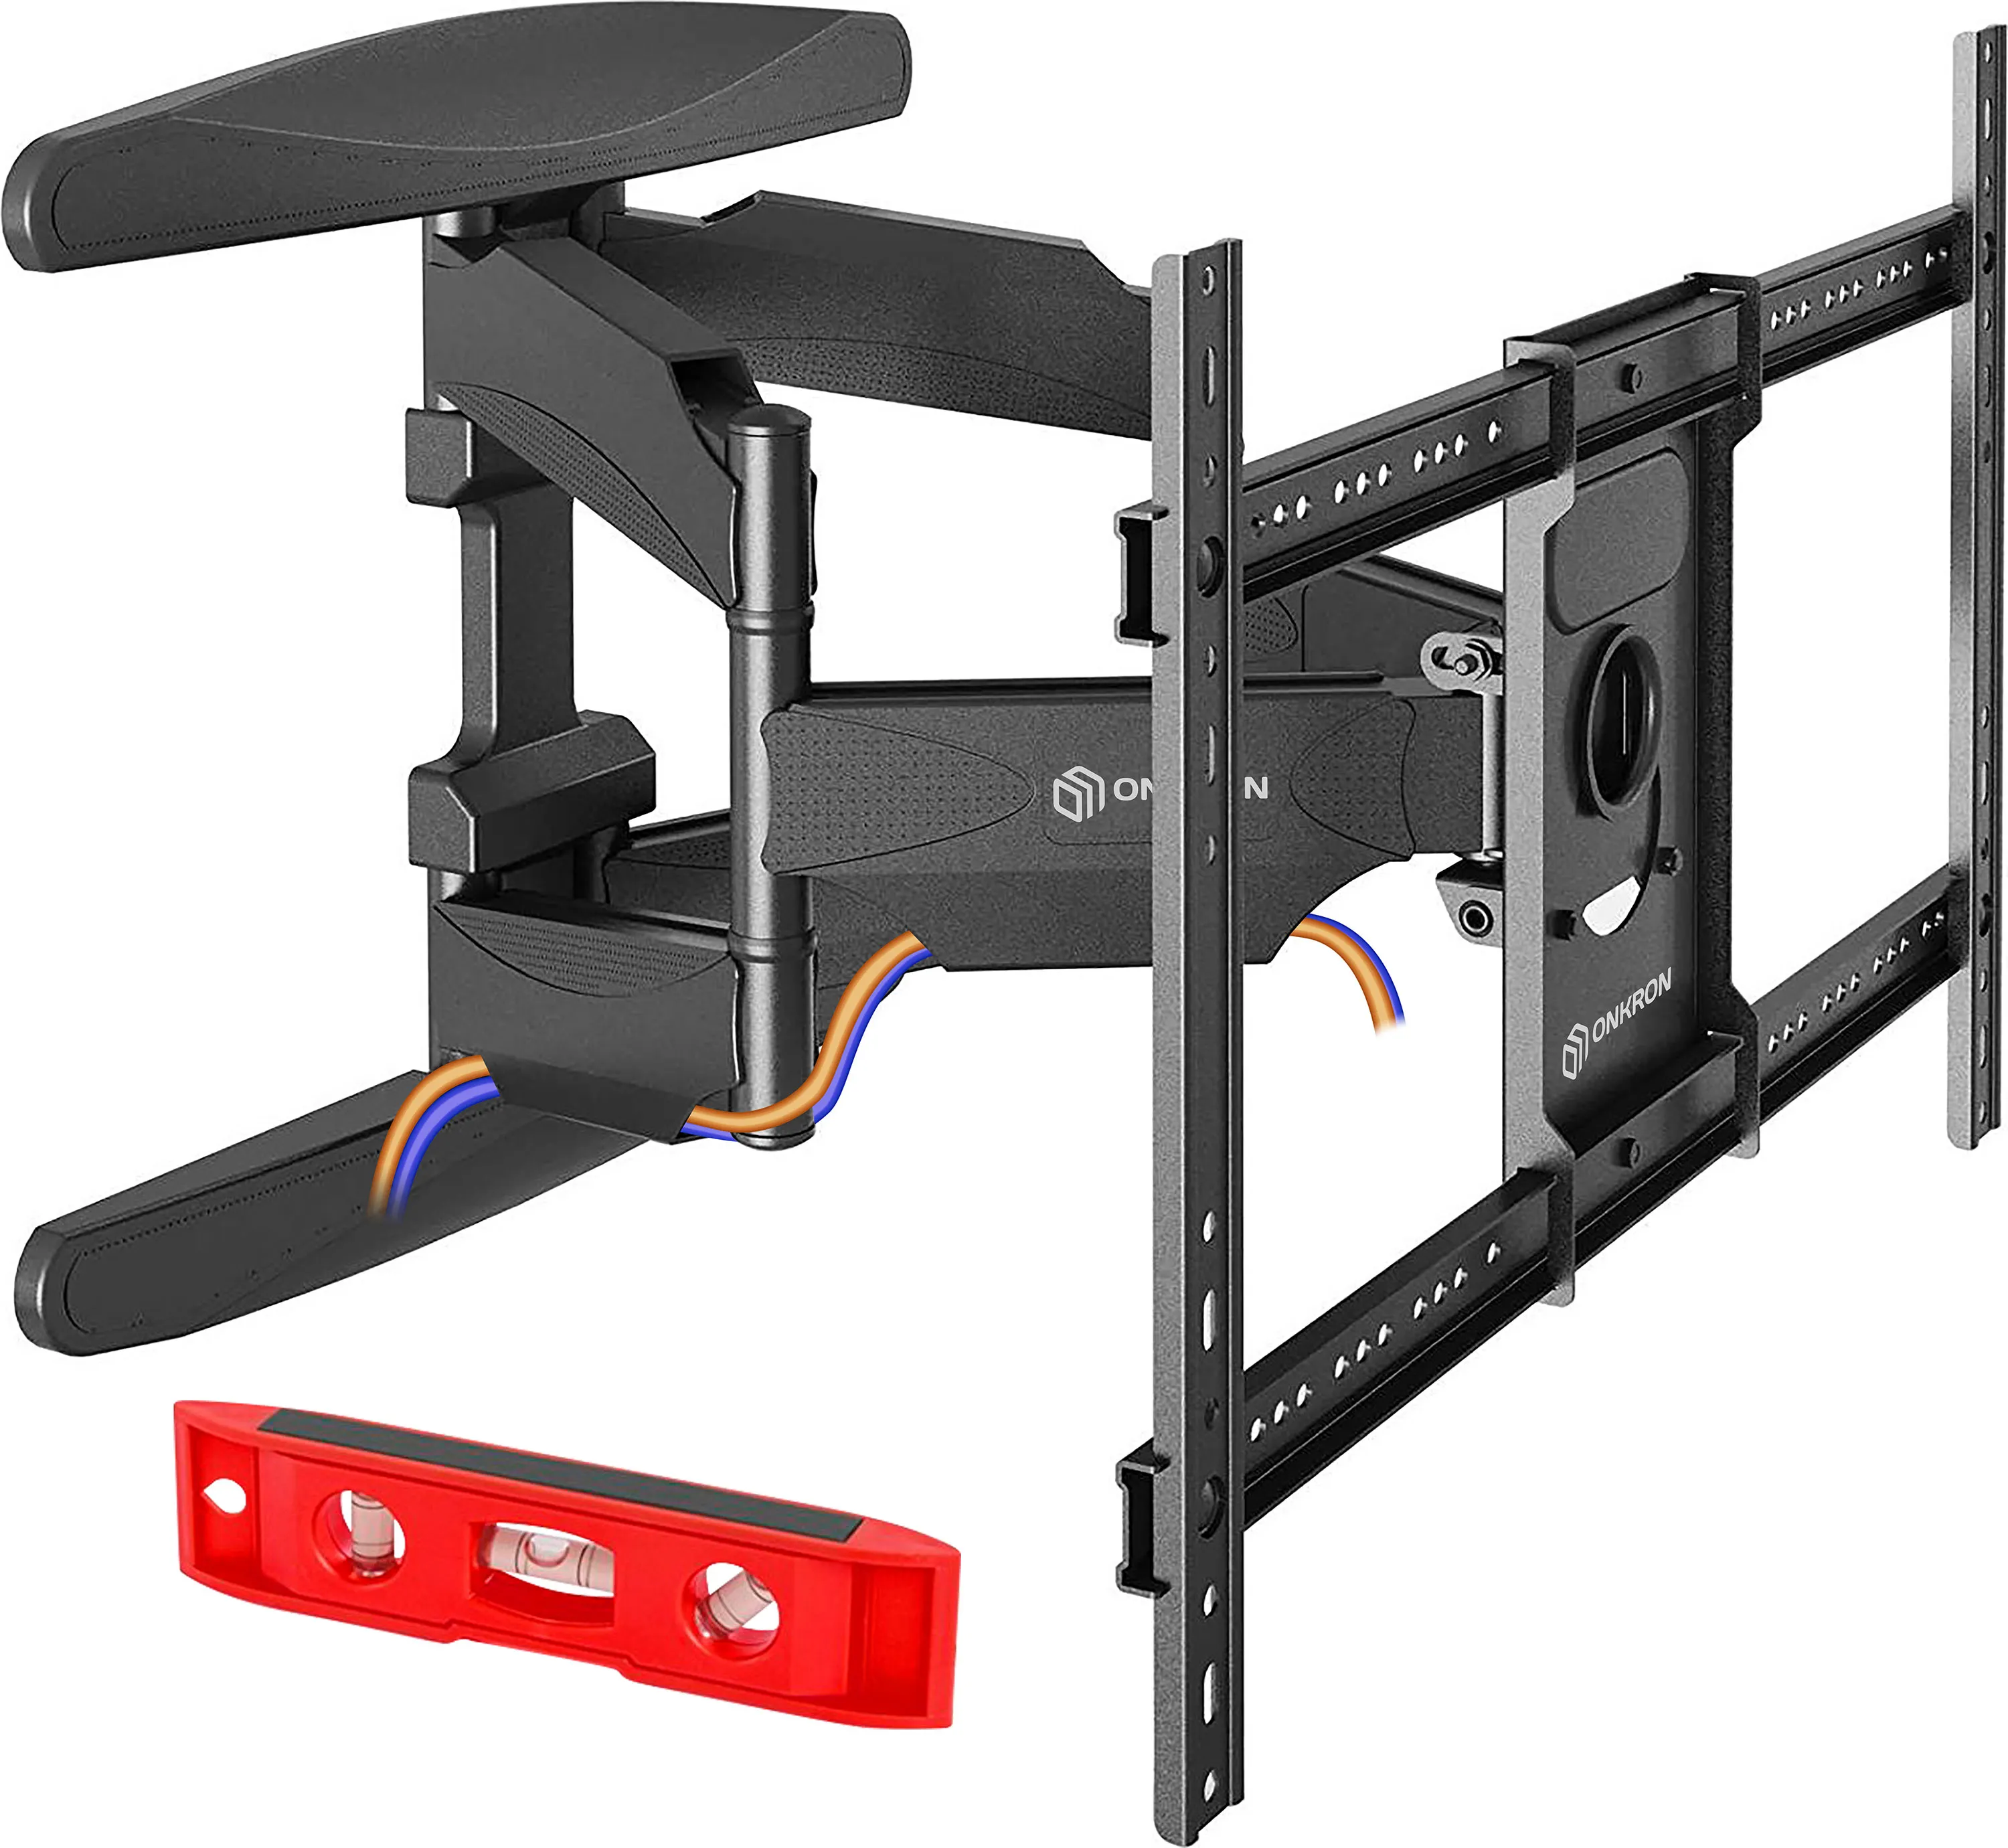 Most popular best sellers ONKRON TV Wall Mount 40-70 Inch Flat Curved Tilt and Extension to 19.7 Monitor Bracket VESA